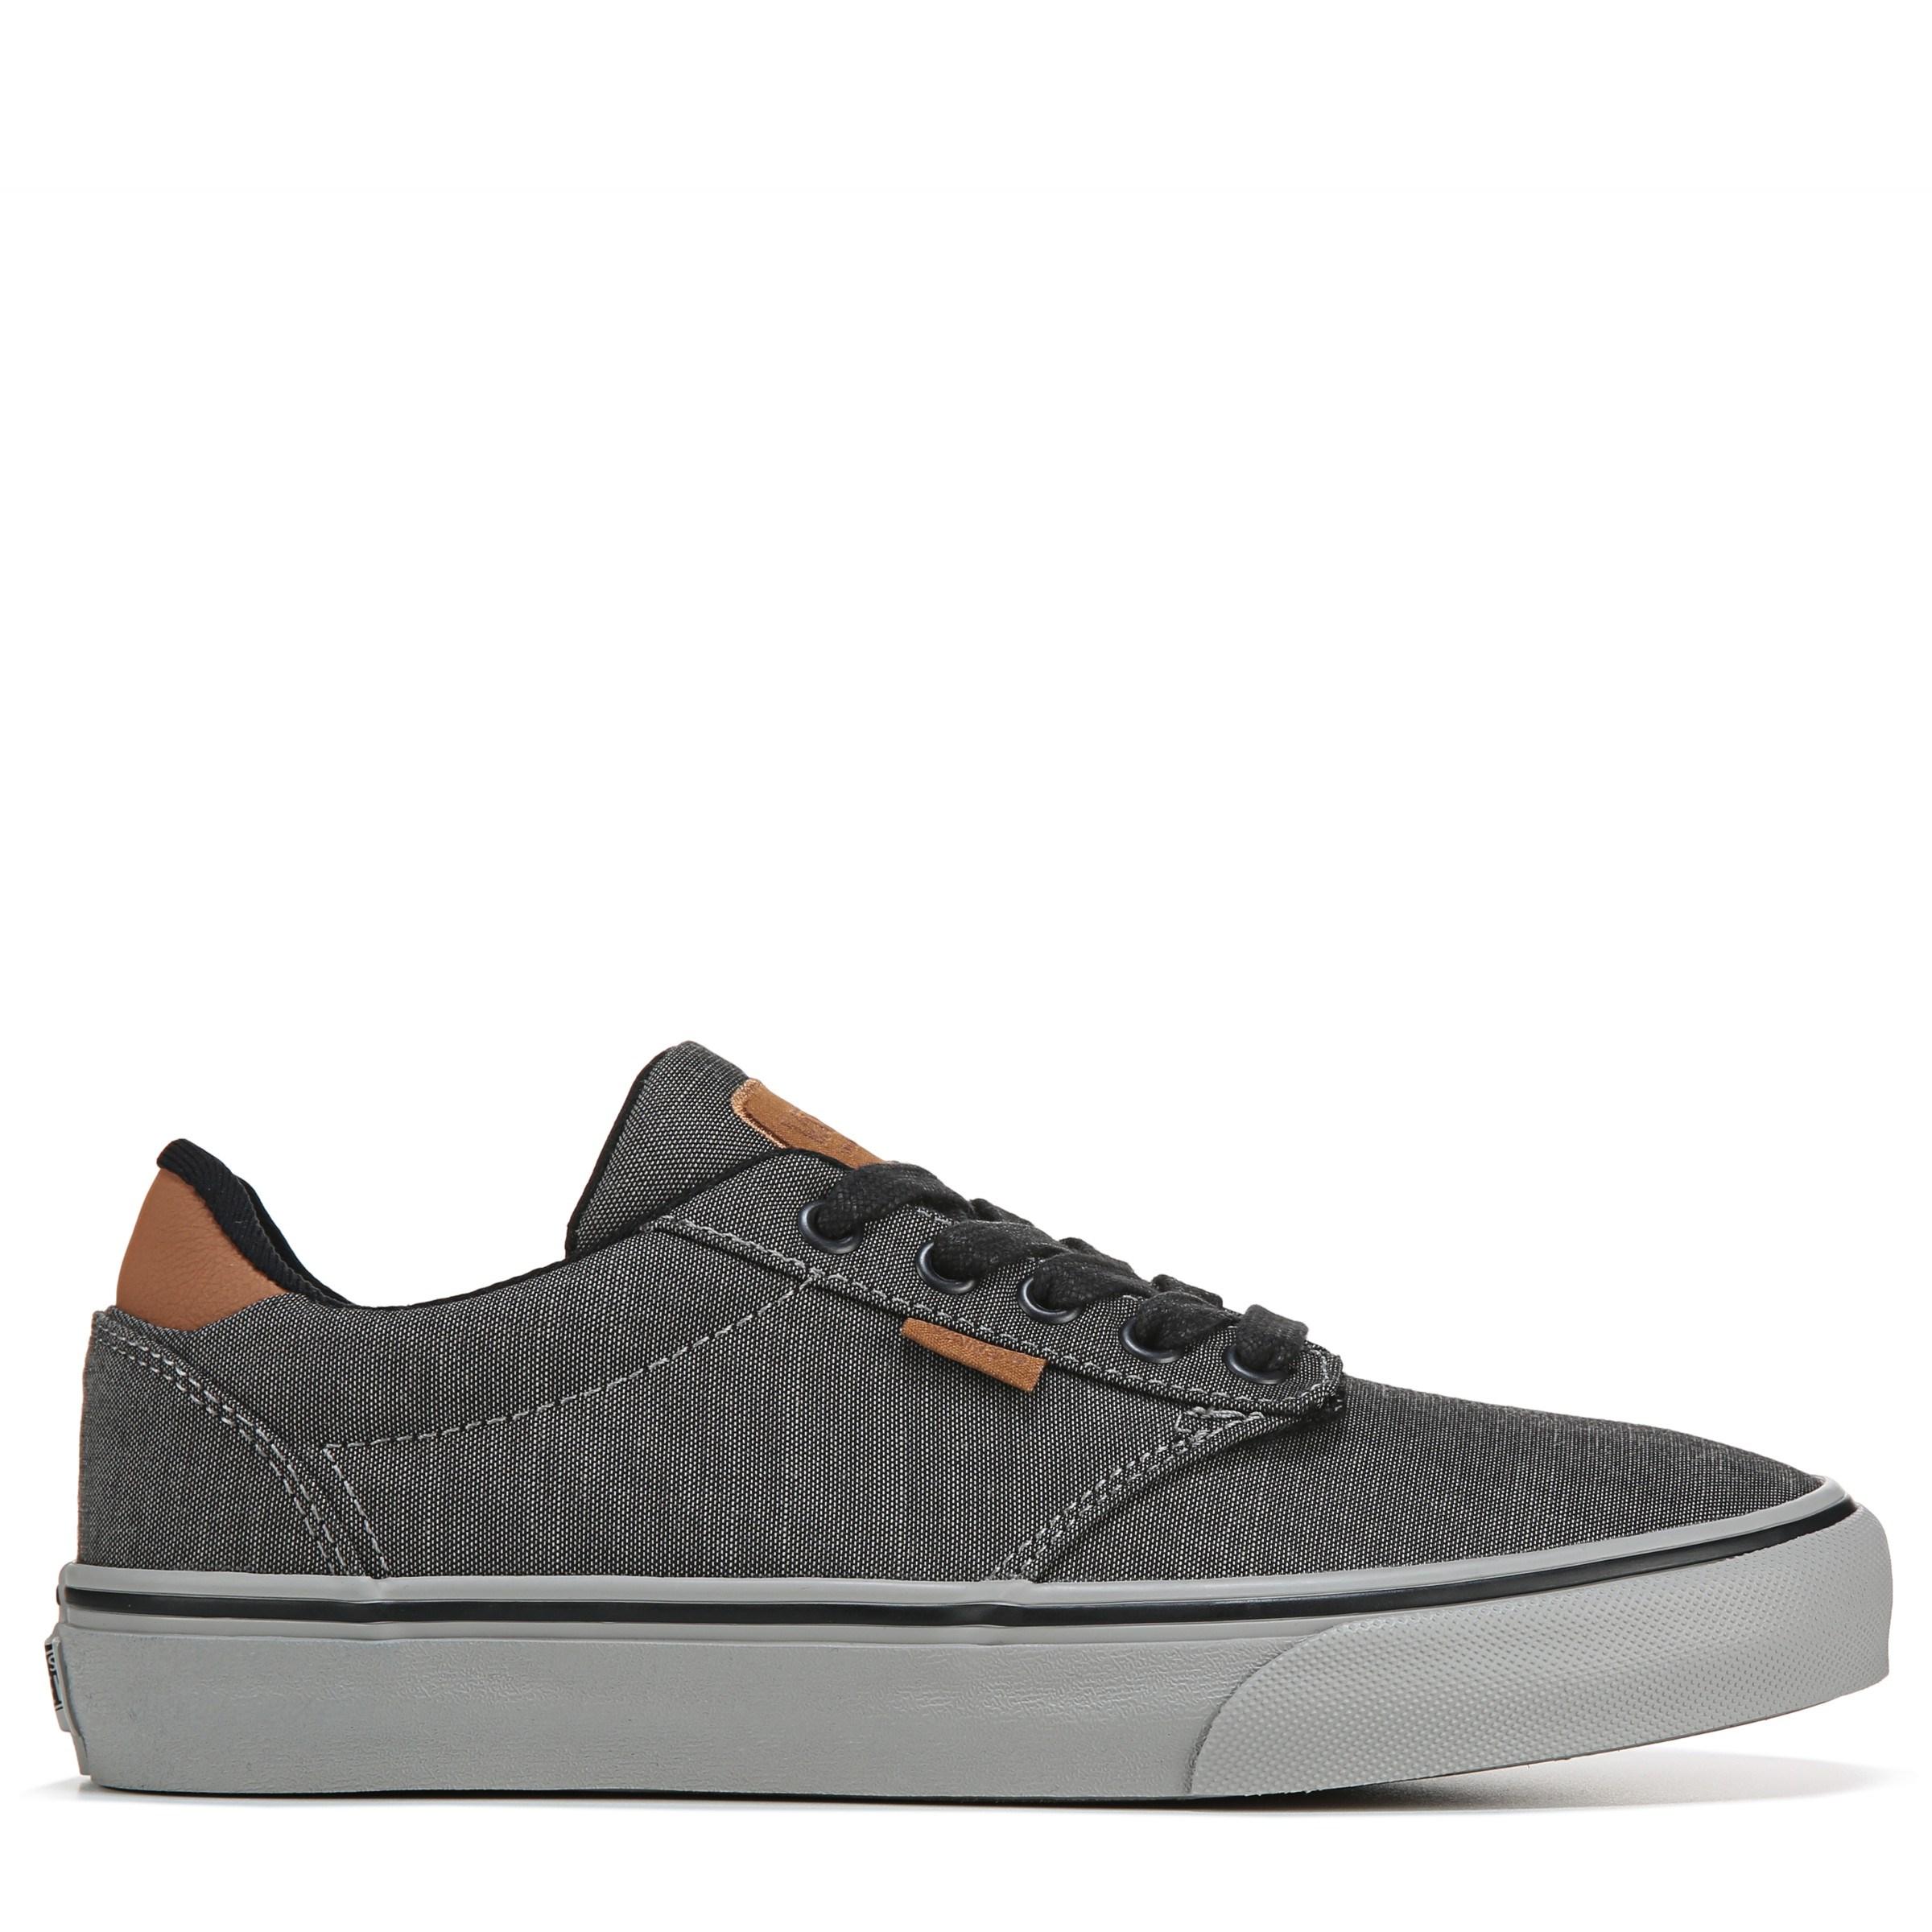 Vans Canvas Atwood Deluxe Ultra Cush 